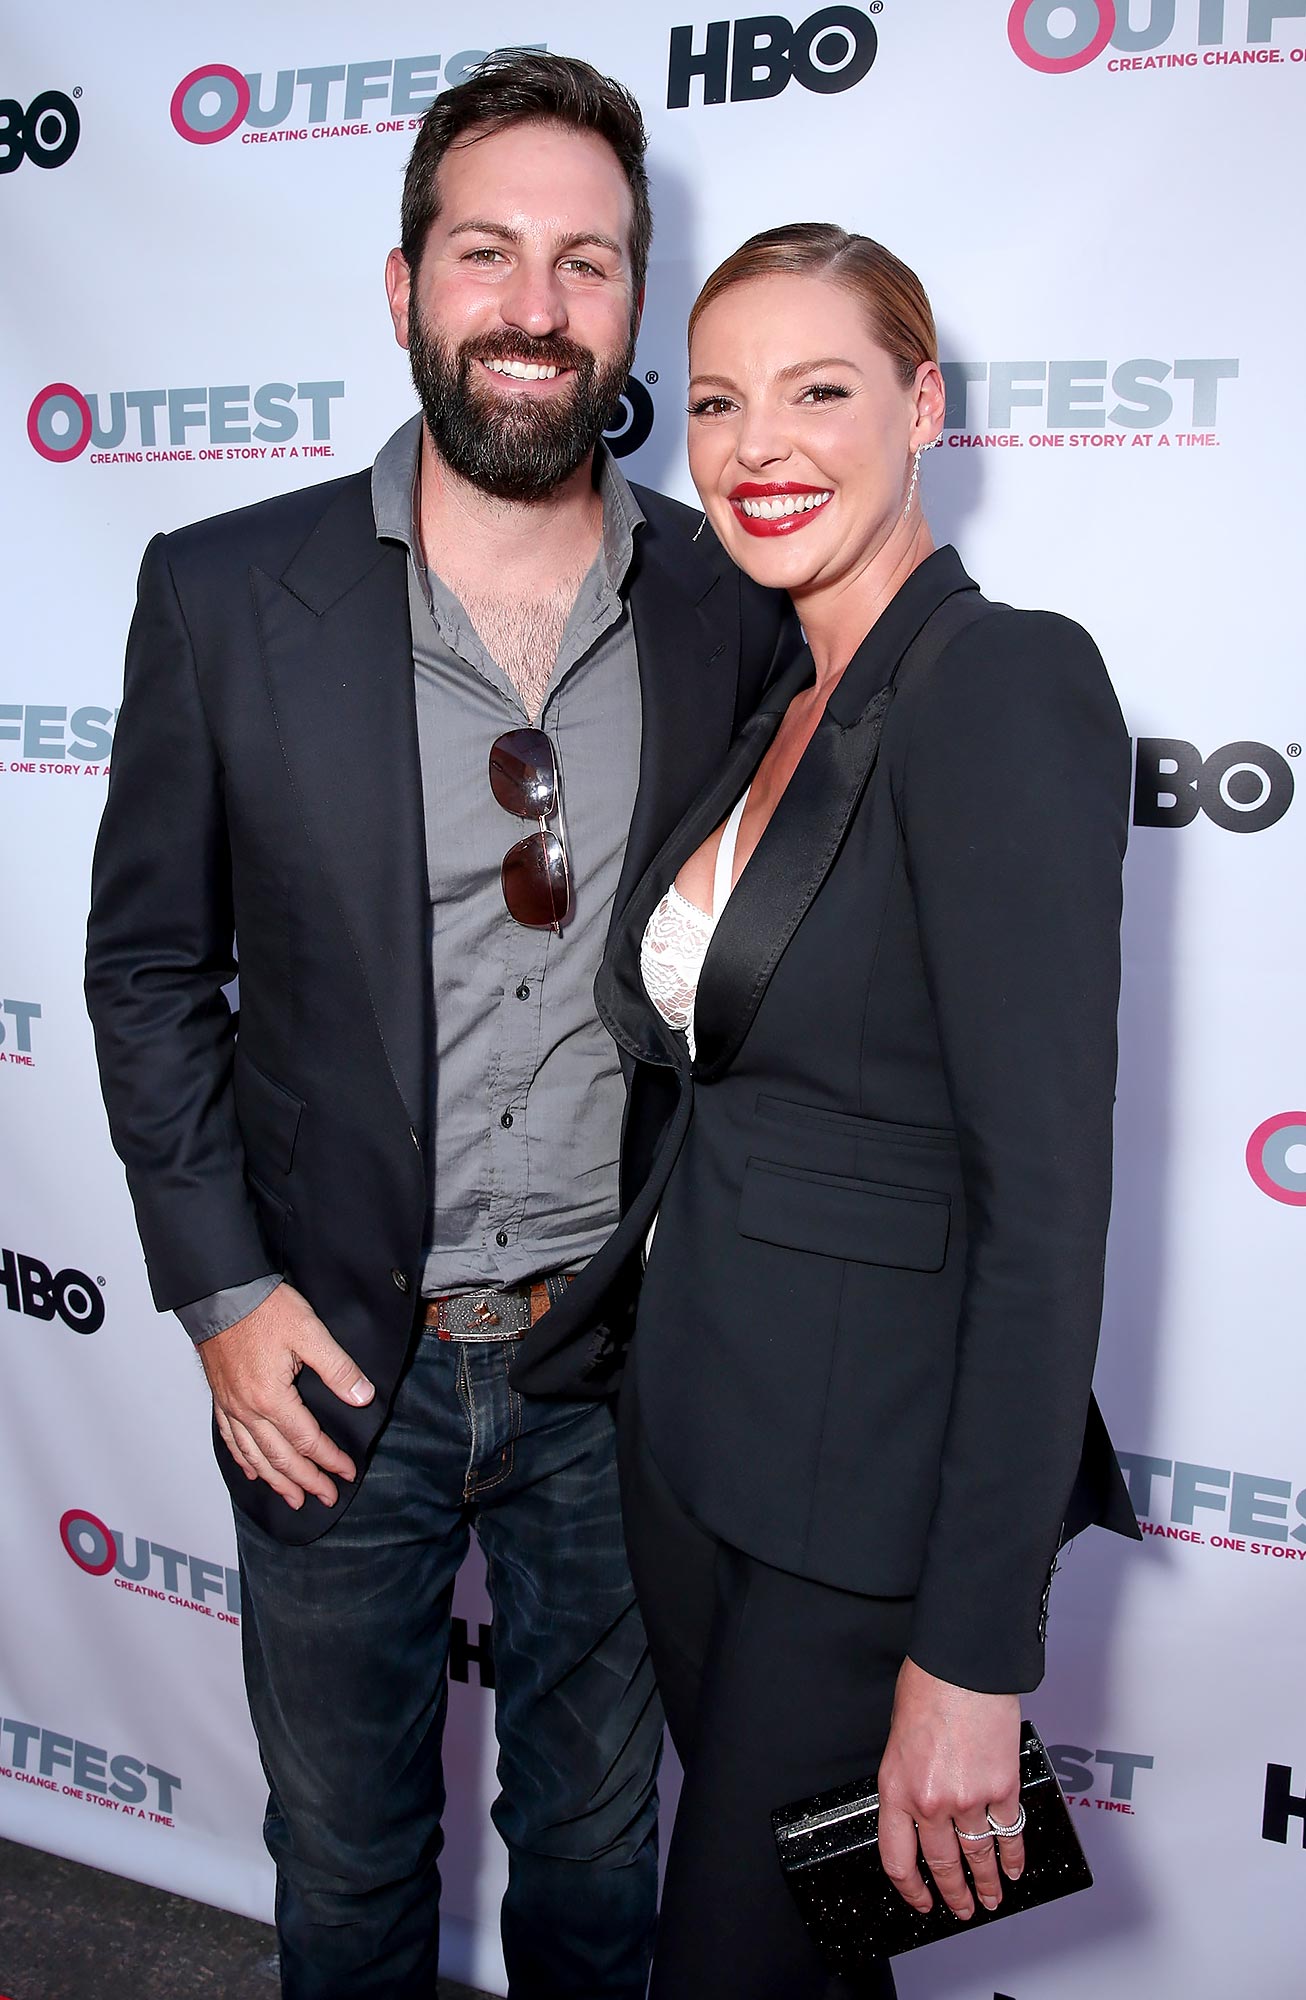 Katherine Heigl and Josh Kelley: A Timeline of Their Relationship